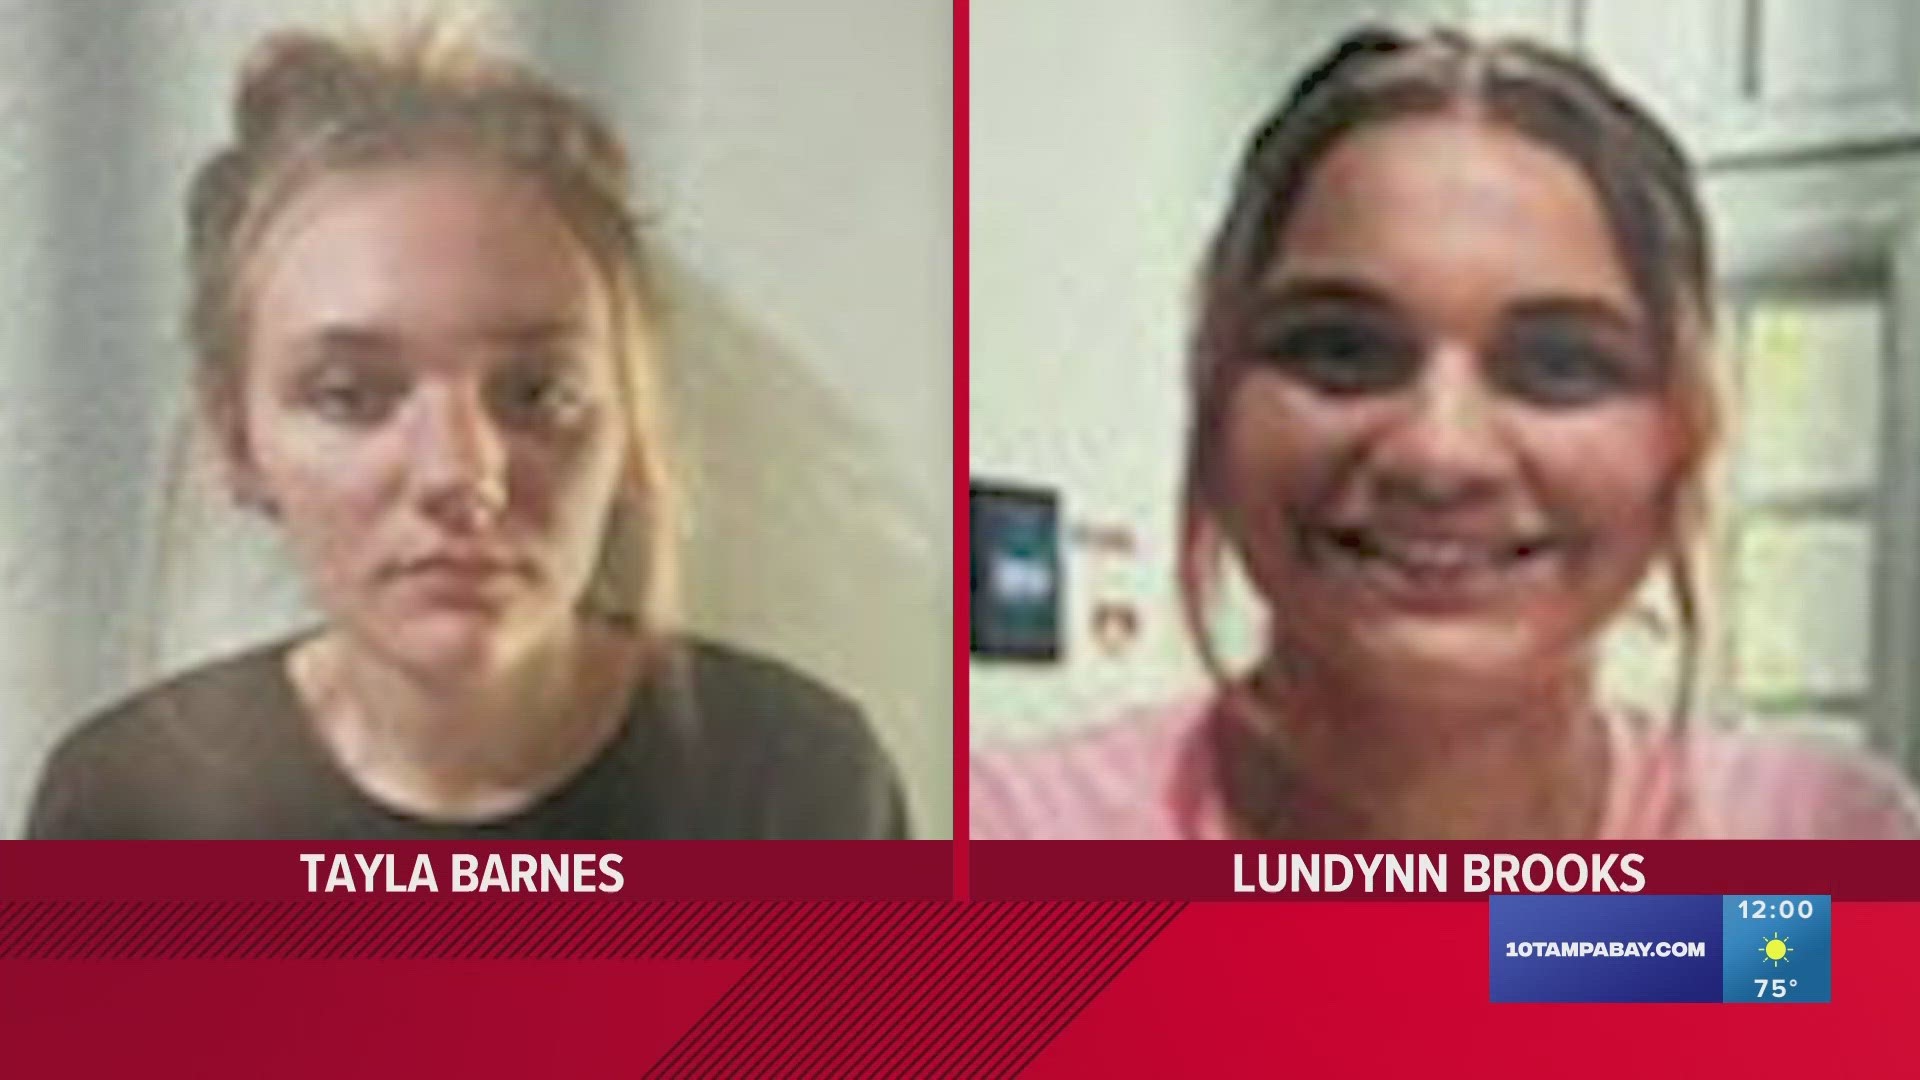 Tayla Barnes, 15, and 17-year-old Lundynn Brooks were last seen April 9 along Sheriff Mylander Way just off State Road 50.